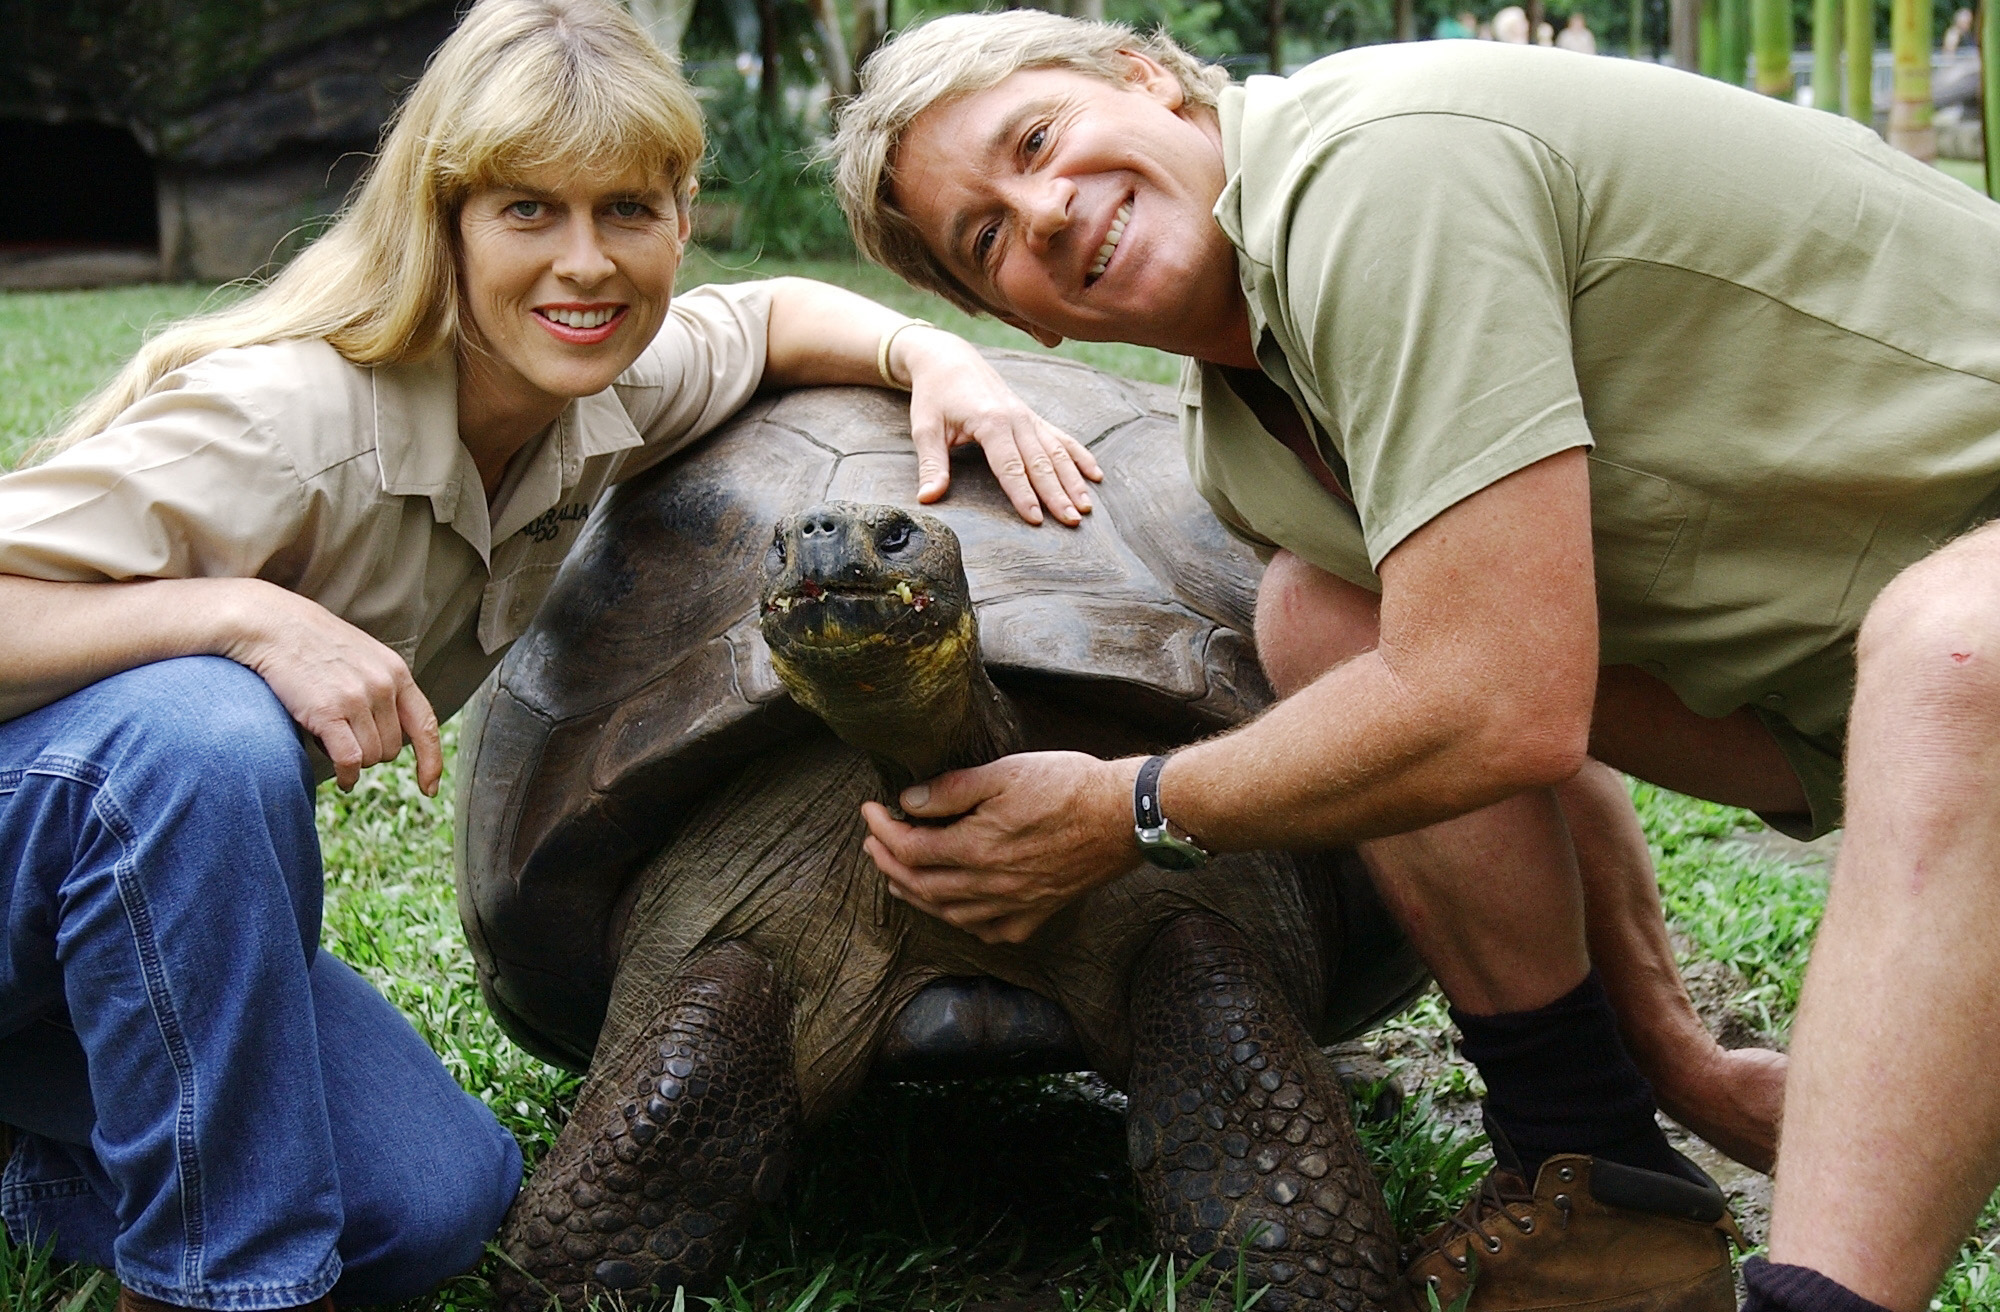 Steve Irwin and 'Harriet' the tortoise who died in 2006 at the age of 176. Harriet was a pet of Charles Darwin in 1835